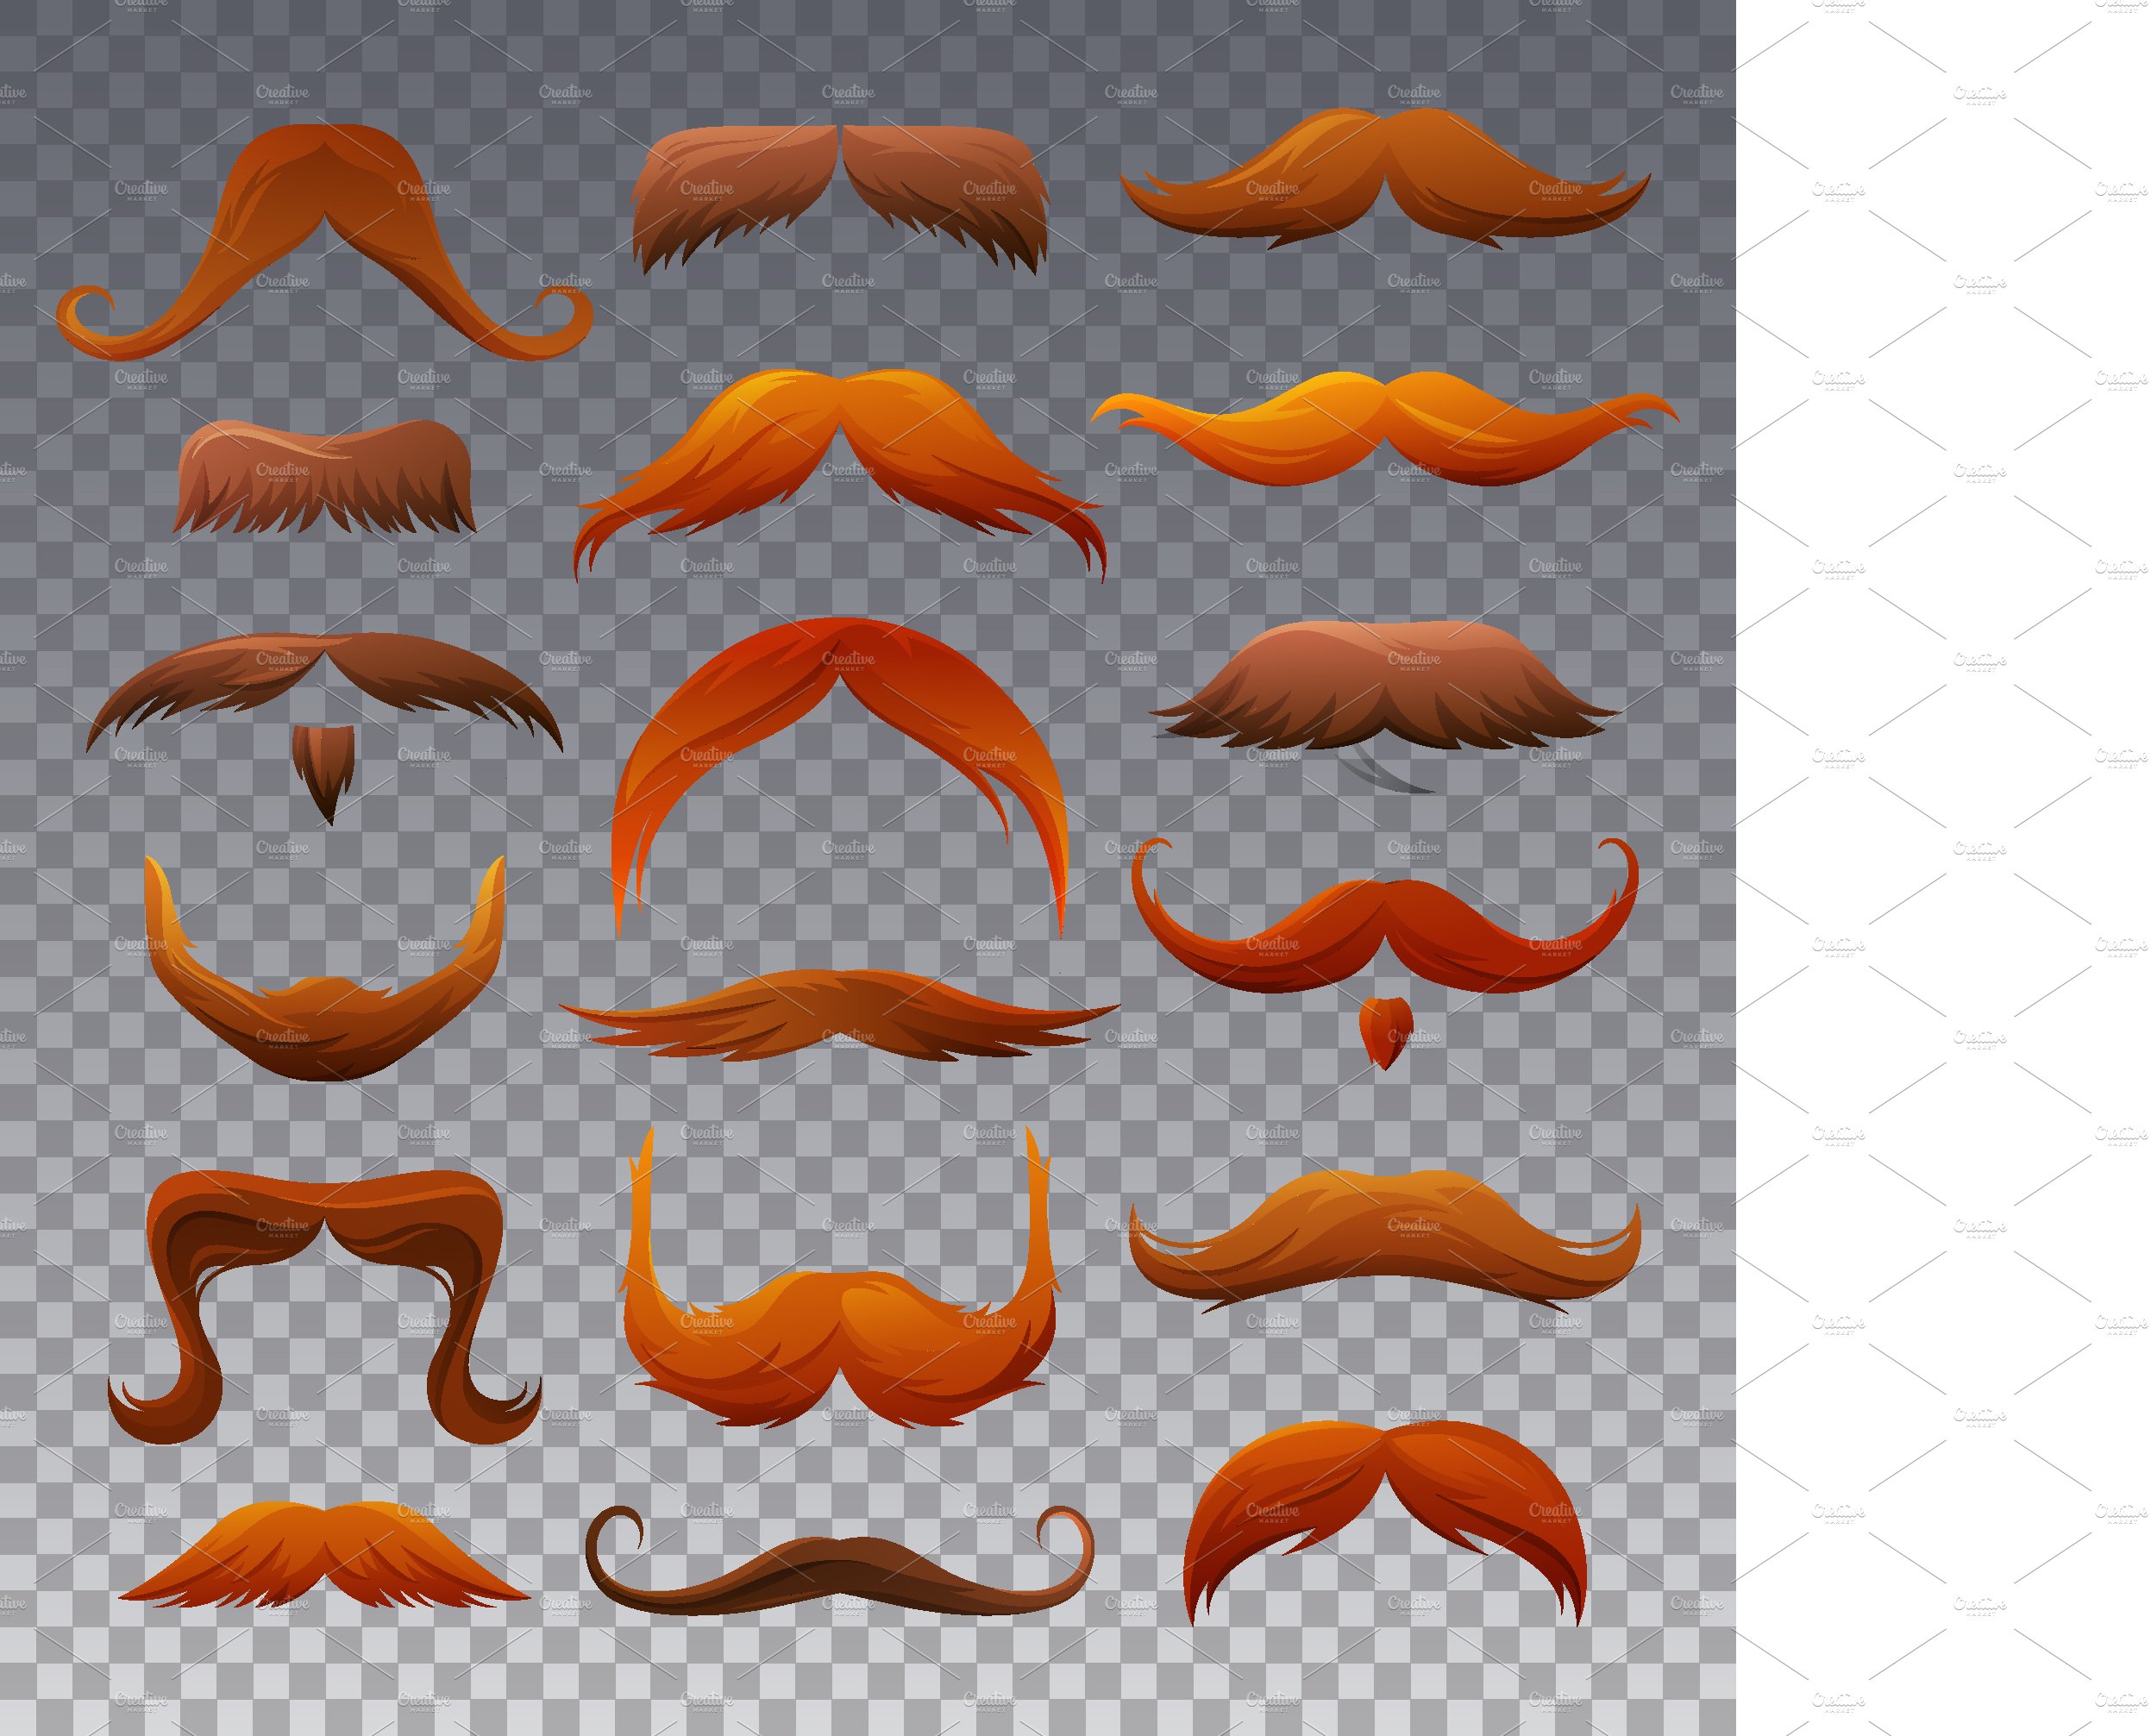 Mustache icons, vector set preview image.